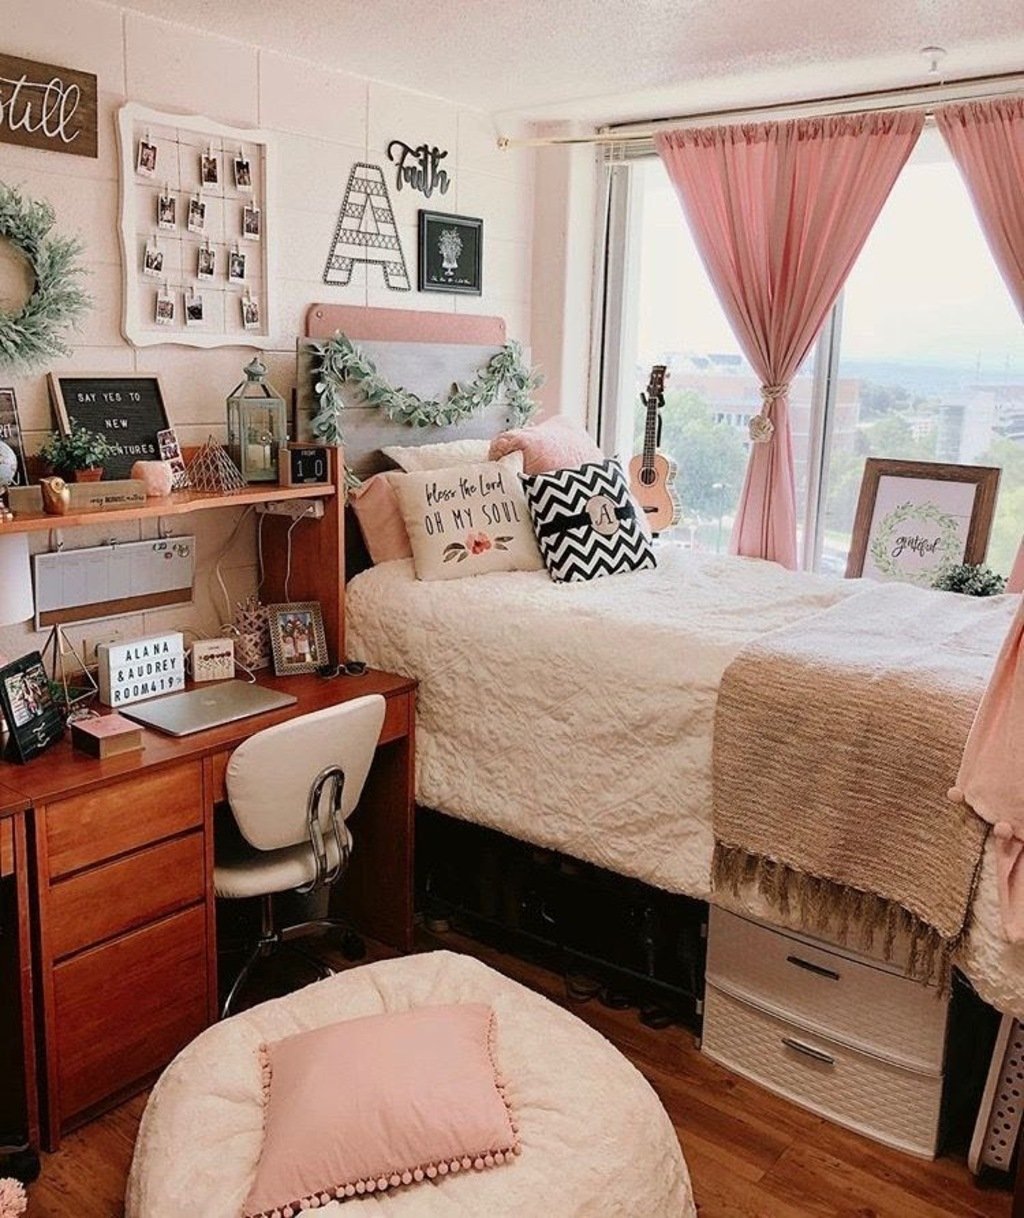 A bedroom with a bed, desk, chair and window
